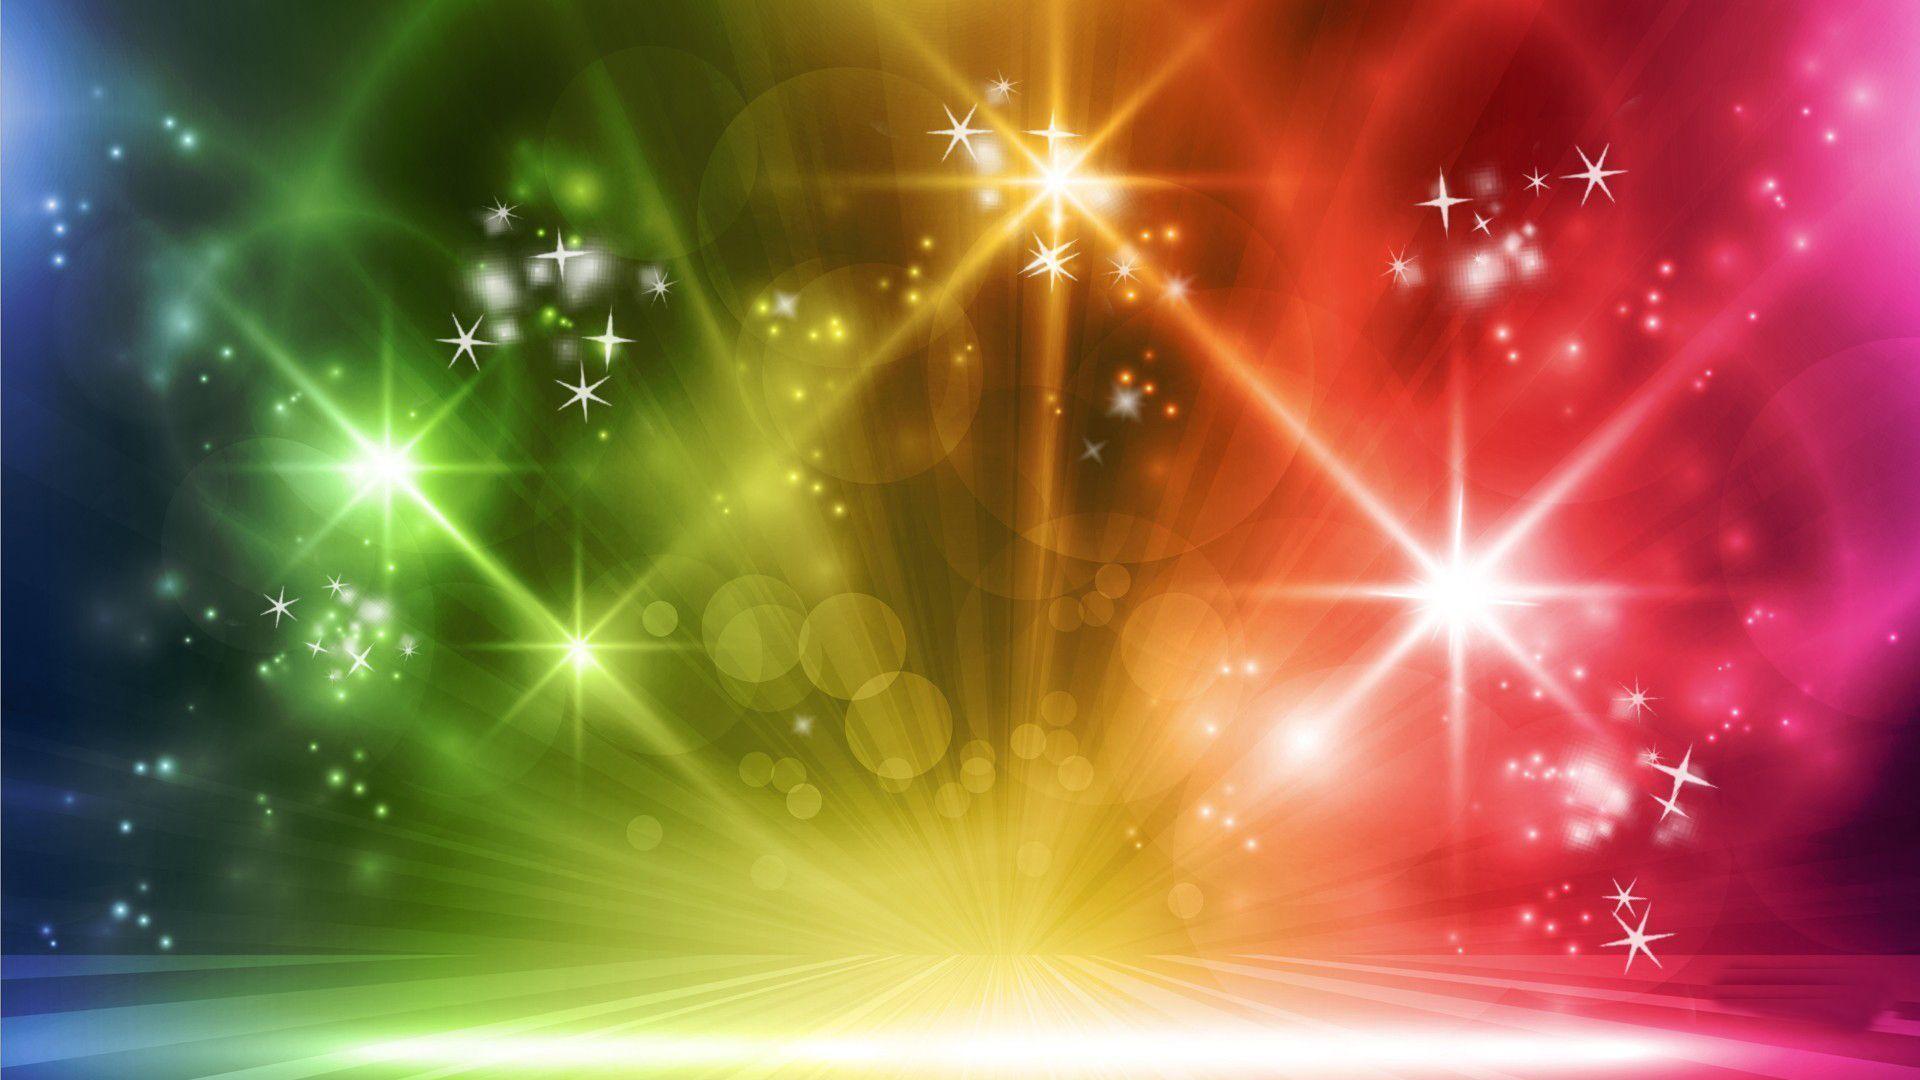 Colorful Designs Background 1920x1200px